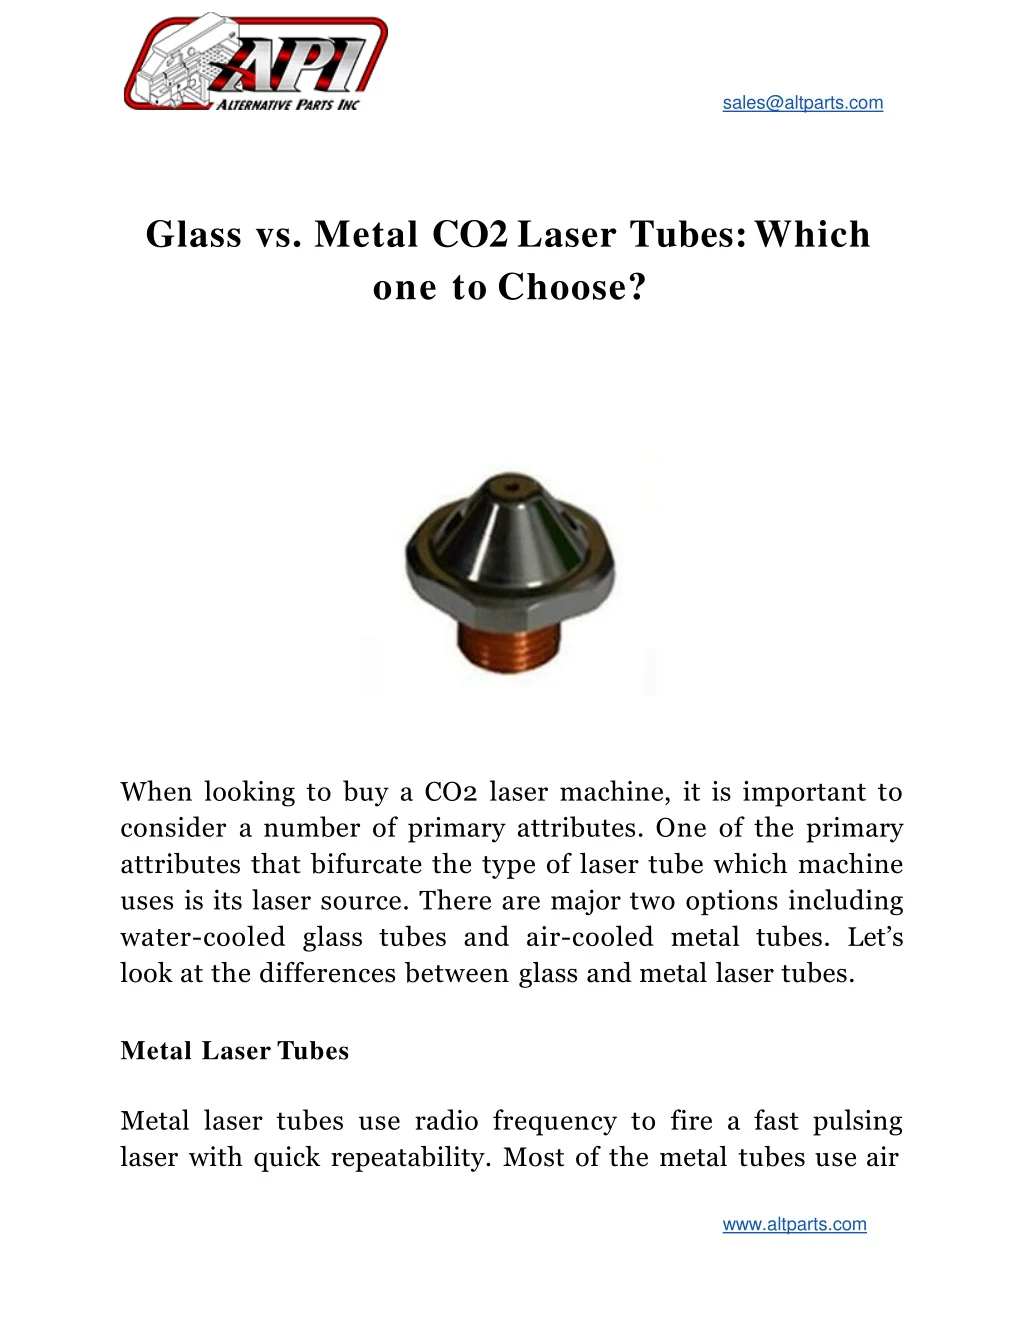 glass vs metal co2 laser tubes which one to choose